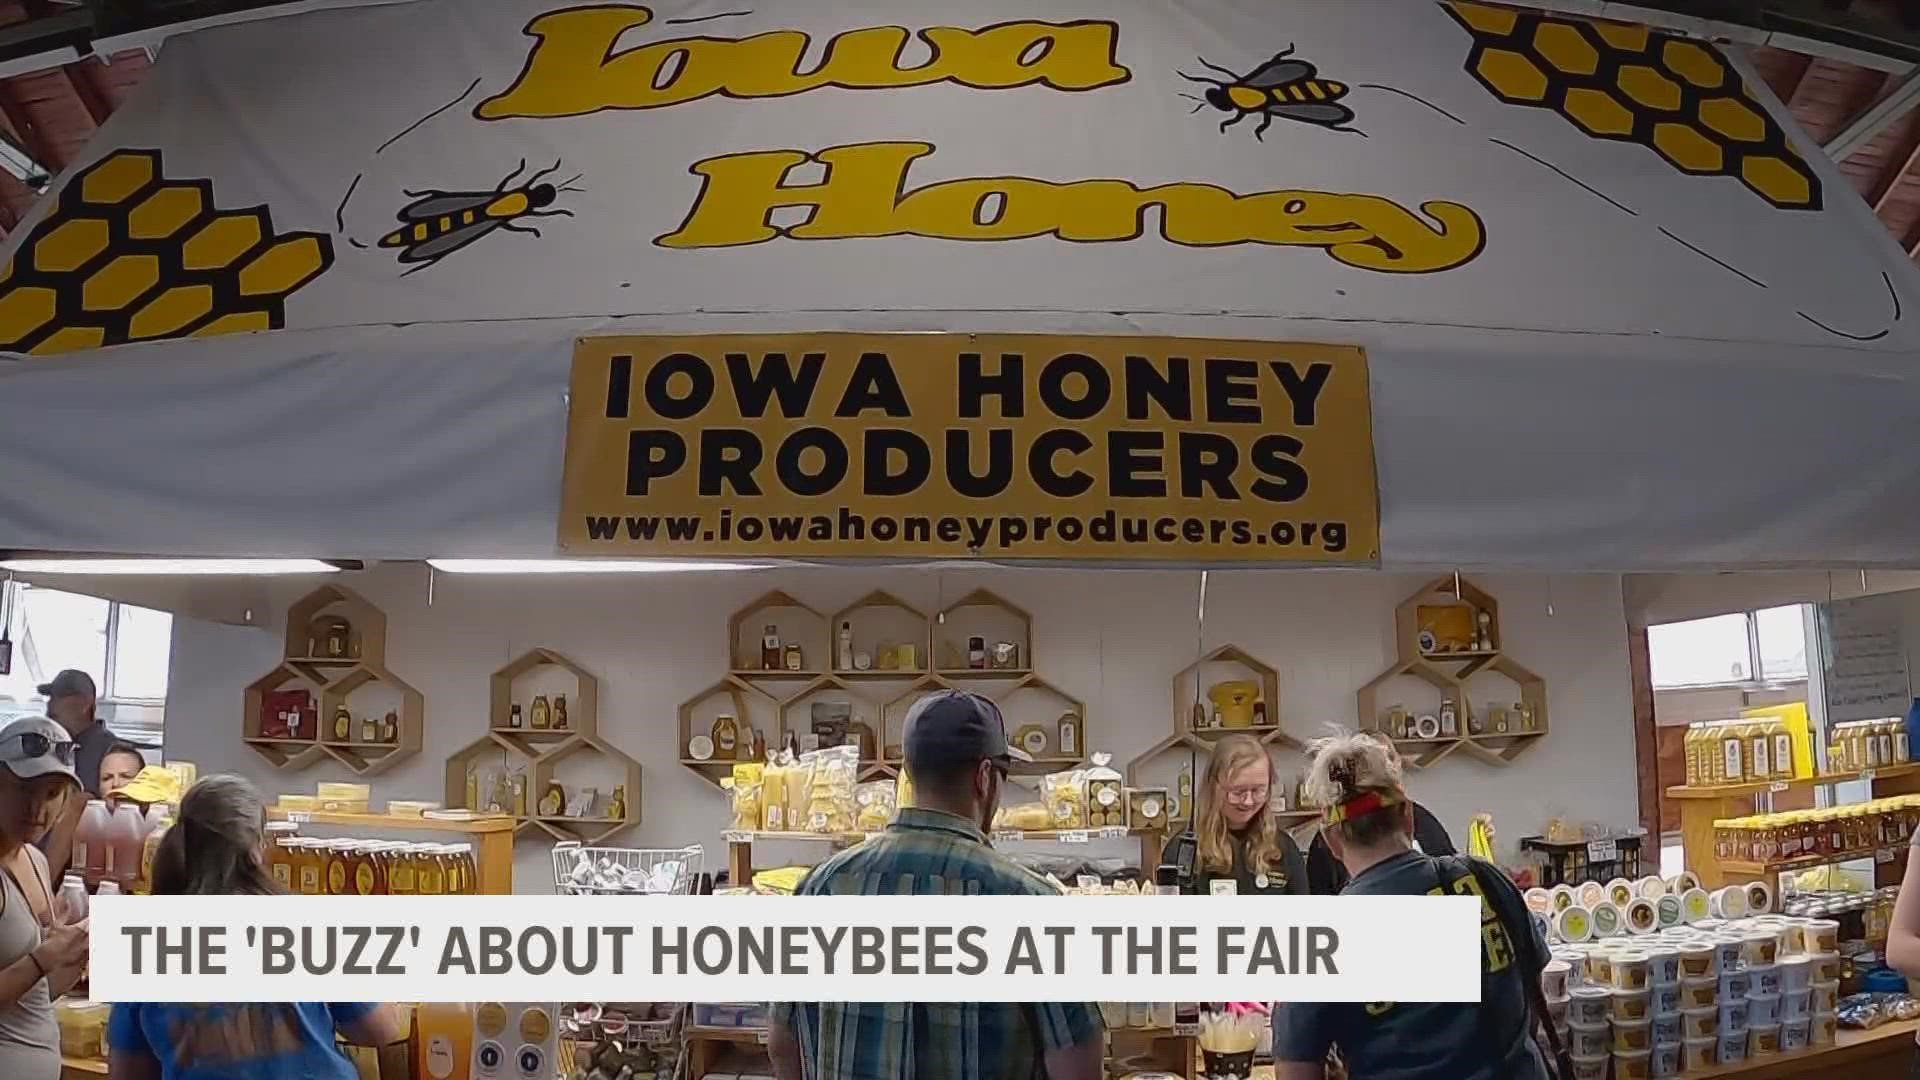 The Iowa Honey Producers Association's booth is a place to purchase delicious honey products and learn about how bees impact our environment.